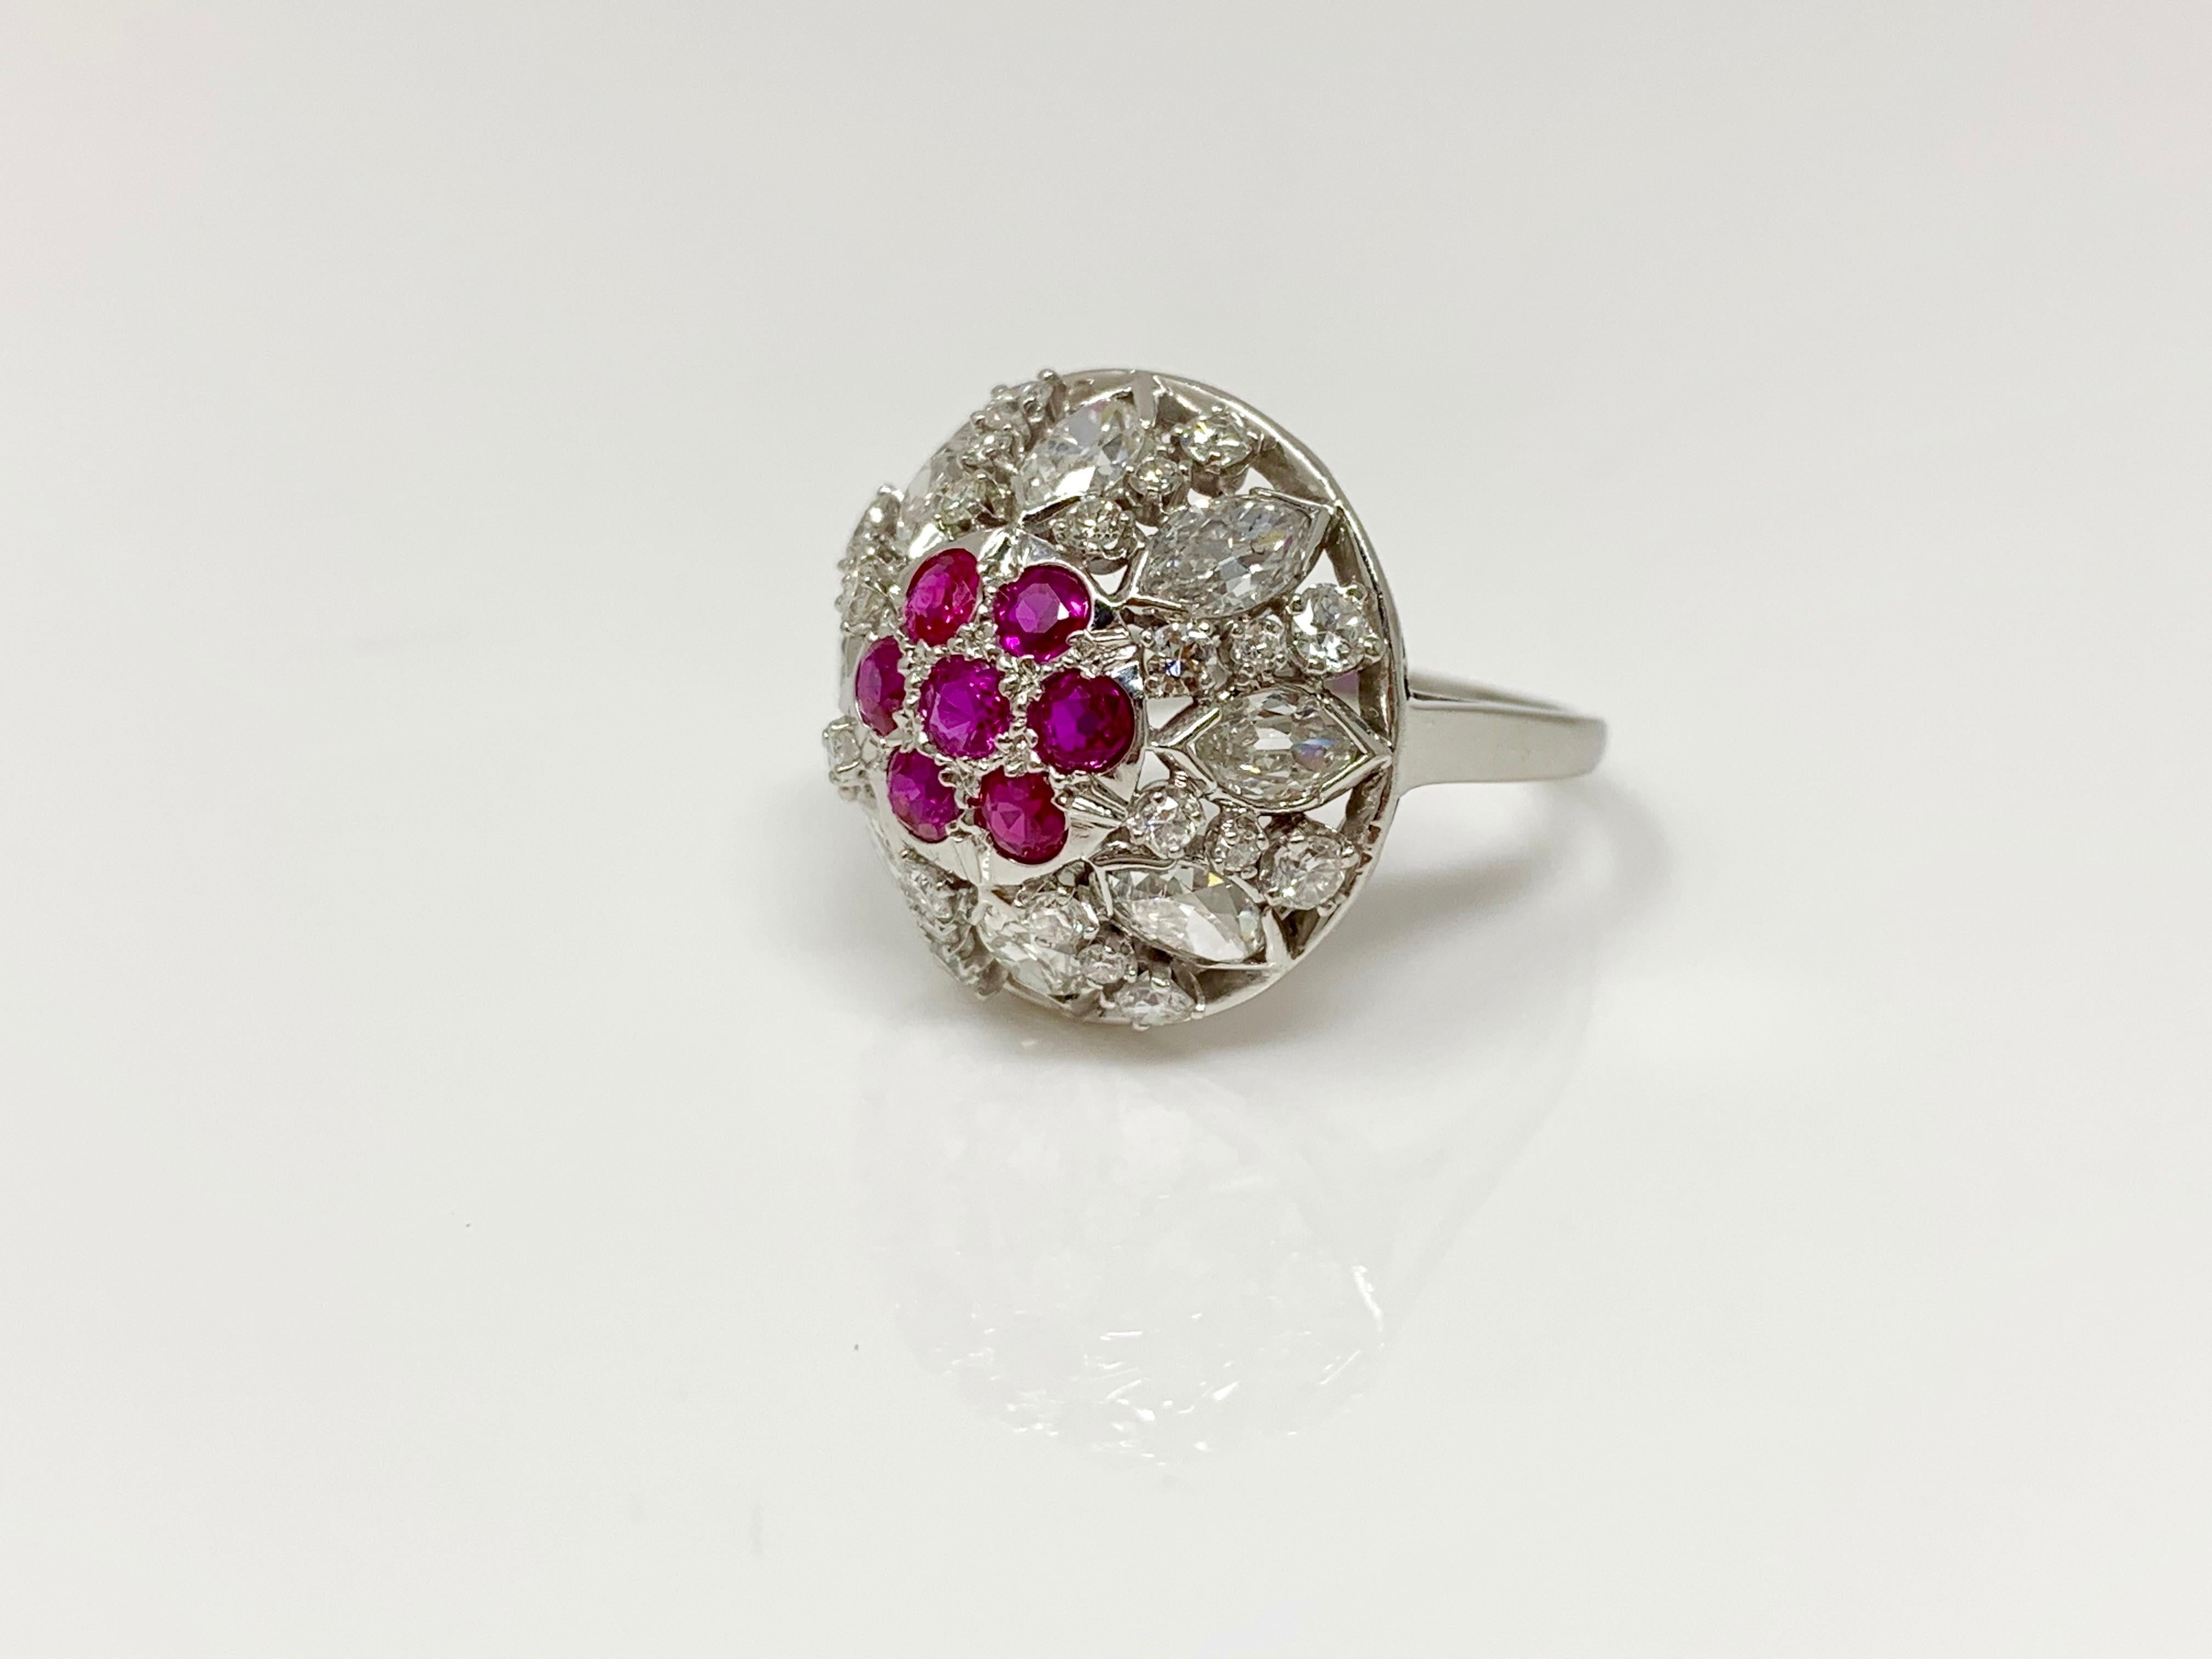 Marquise Cut Diamond and Ruby Ring in 18 Karat White Gold